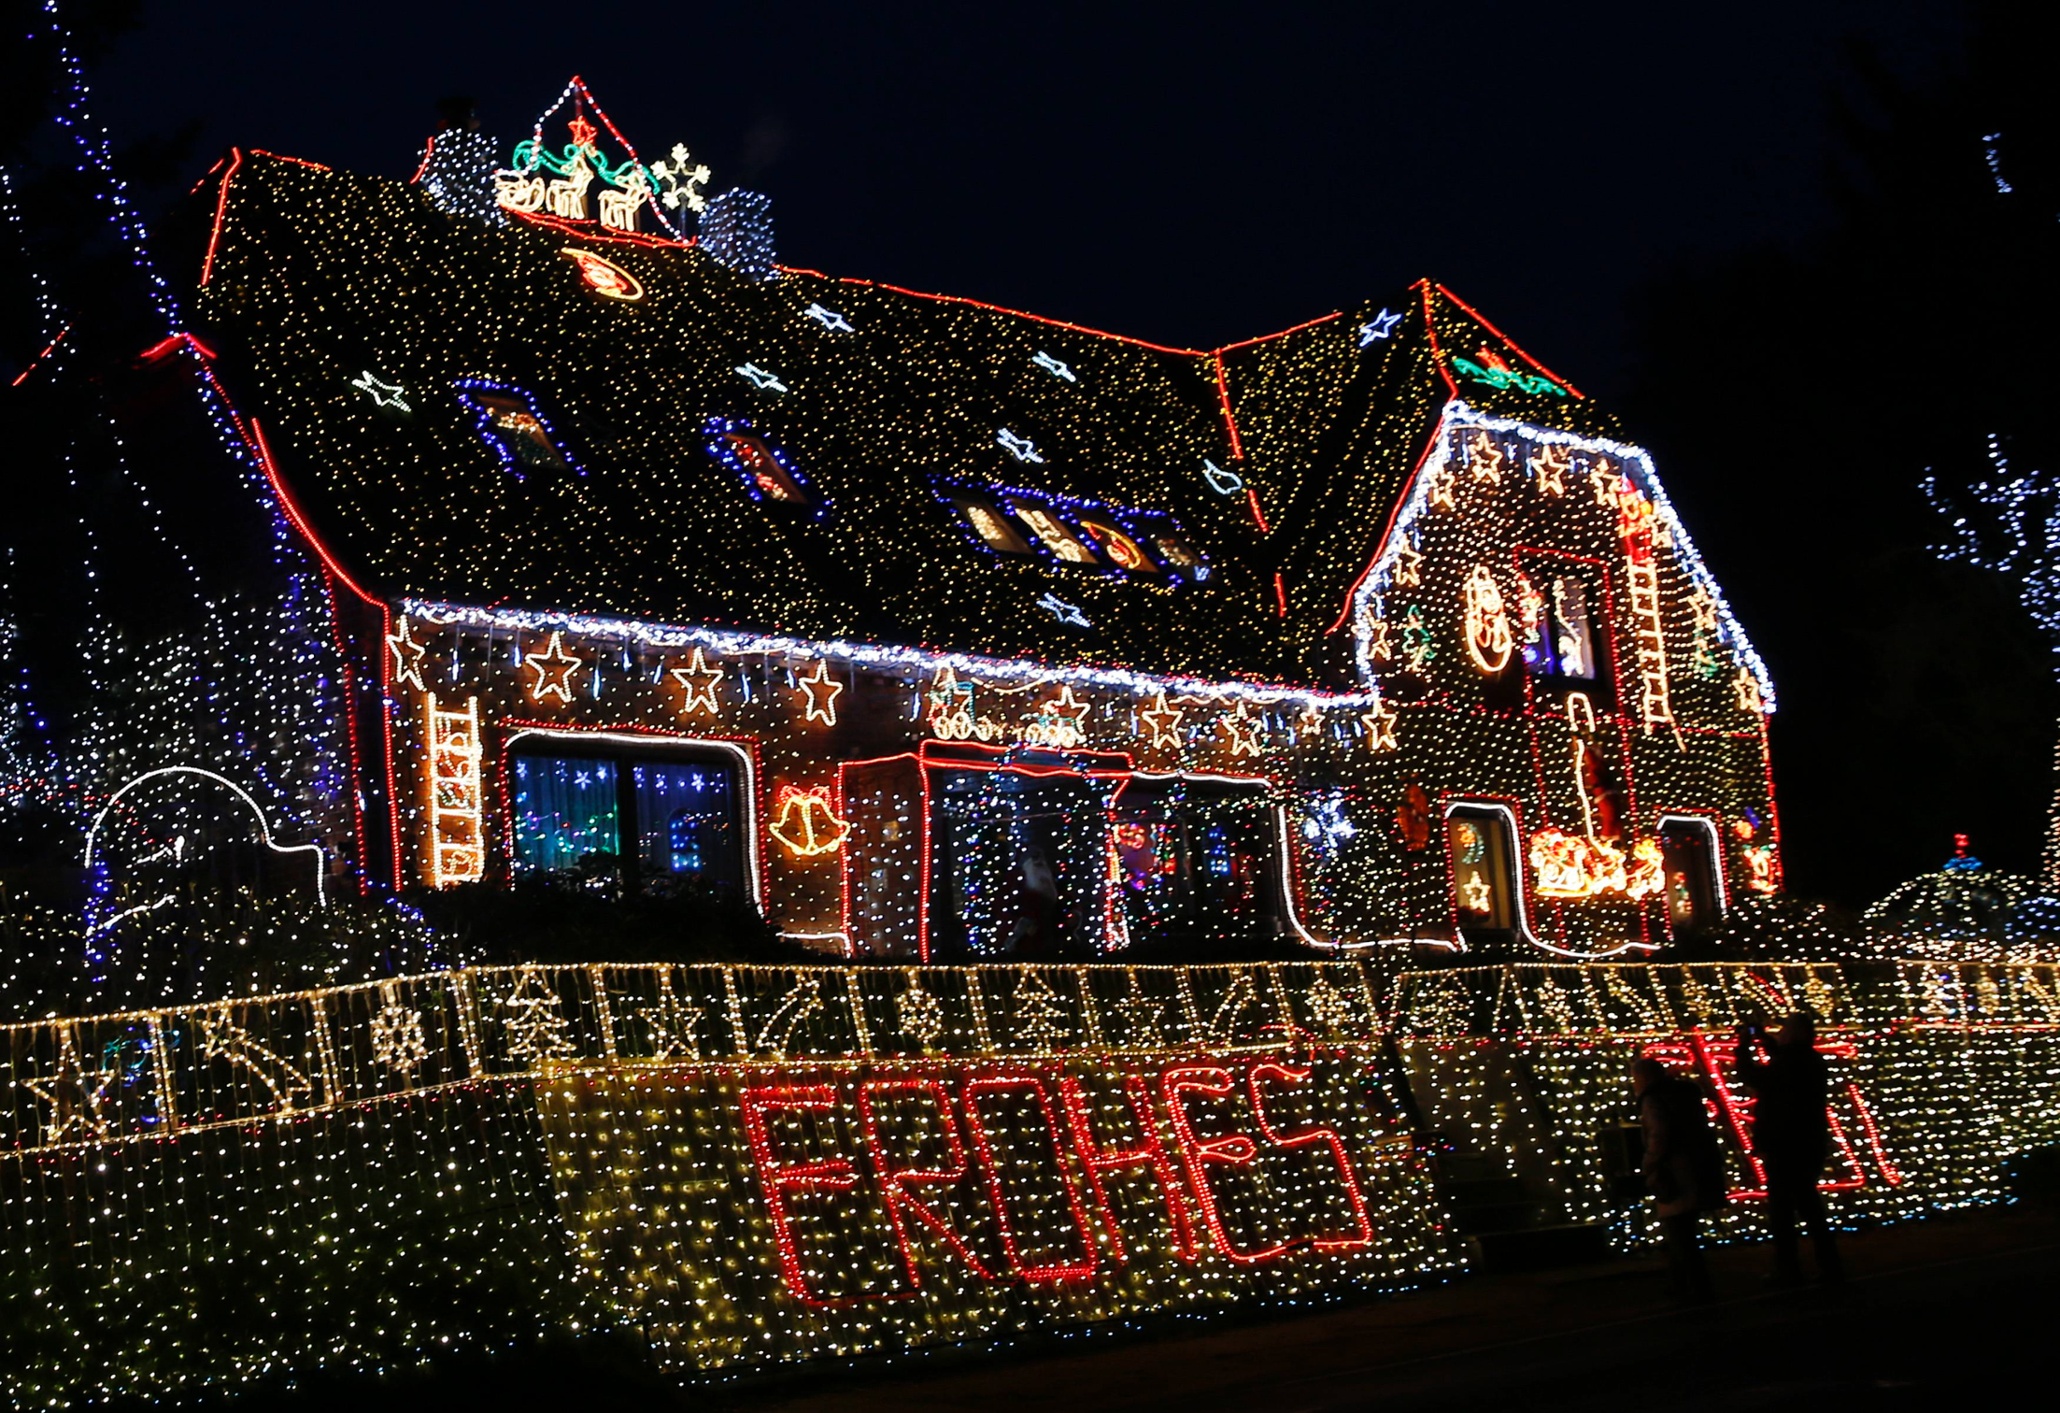 Christmas lights around the world - in pictures | News ...